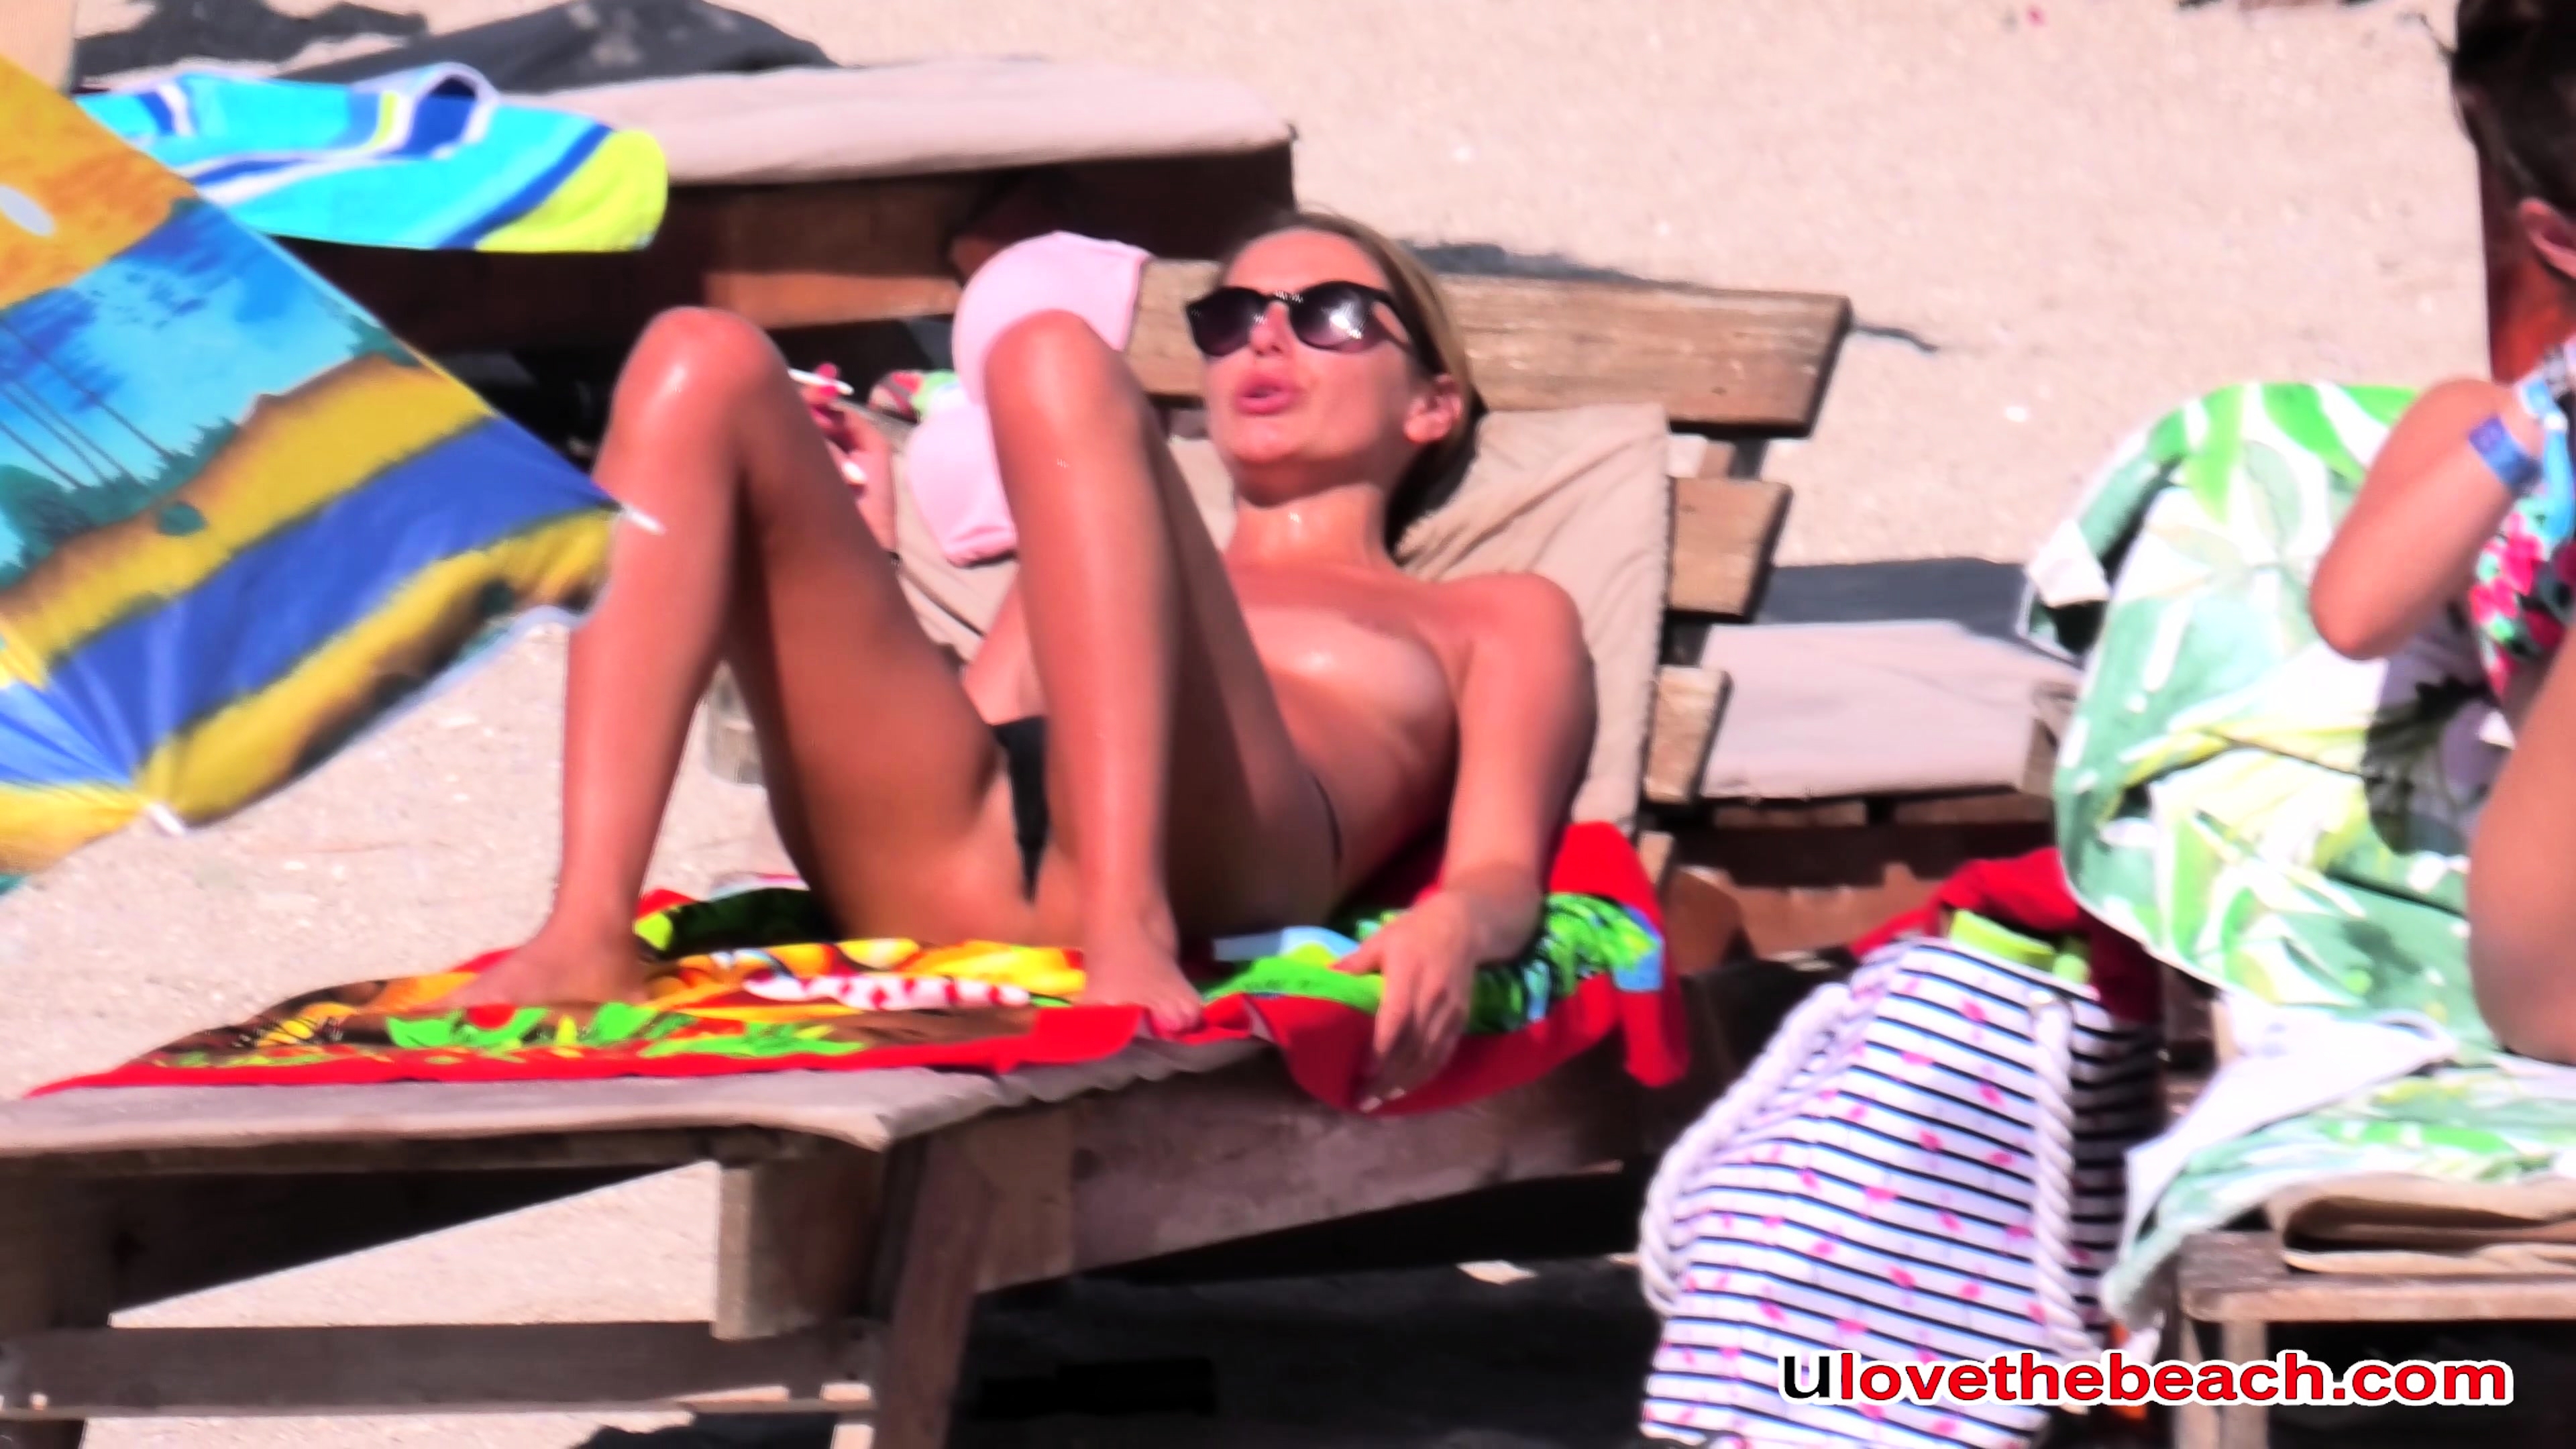 Free Mobile Porn Videos - Big Tits Topless Hot Milfs Spied At Beach By Voyeur Spy Cam - 3892296 pic